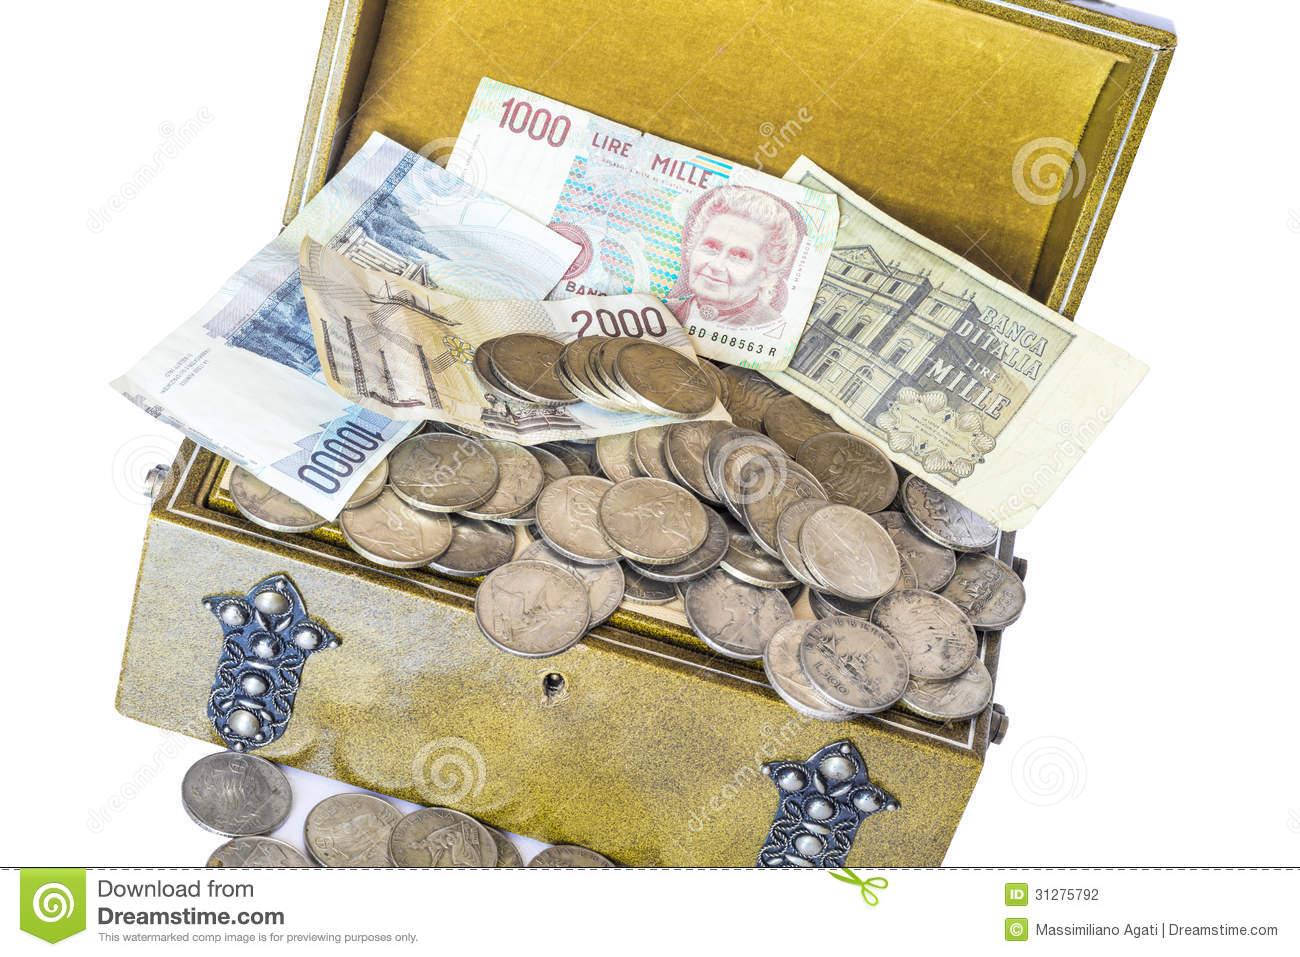 Treasure Of Old Silver Coins And Italian Paper Money Out Of Course